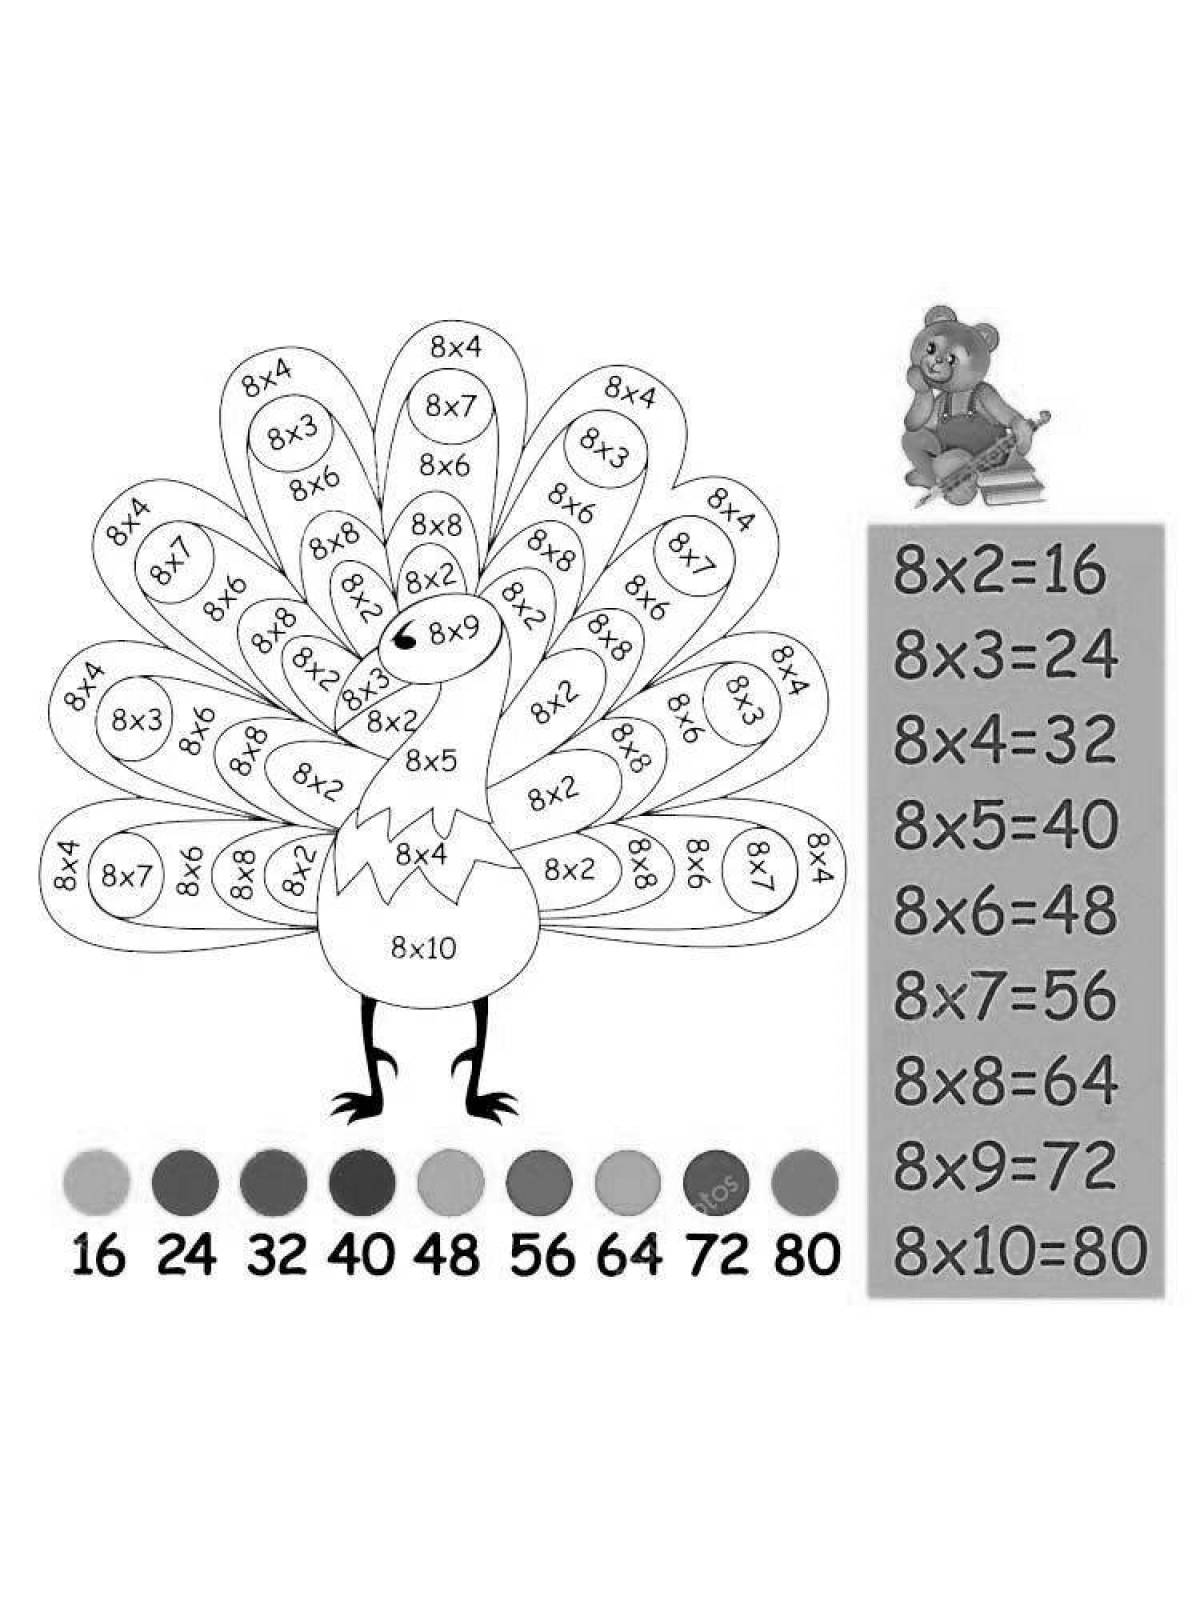 An interesting multiplication table for 4